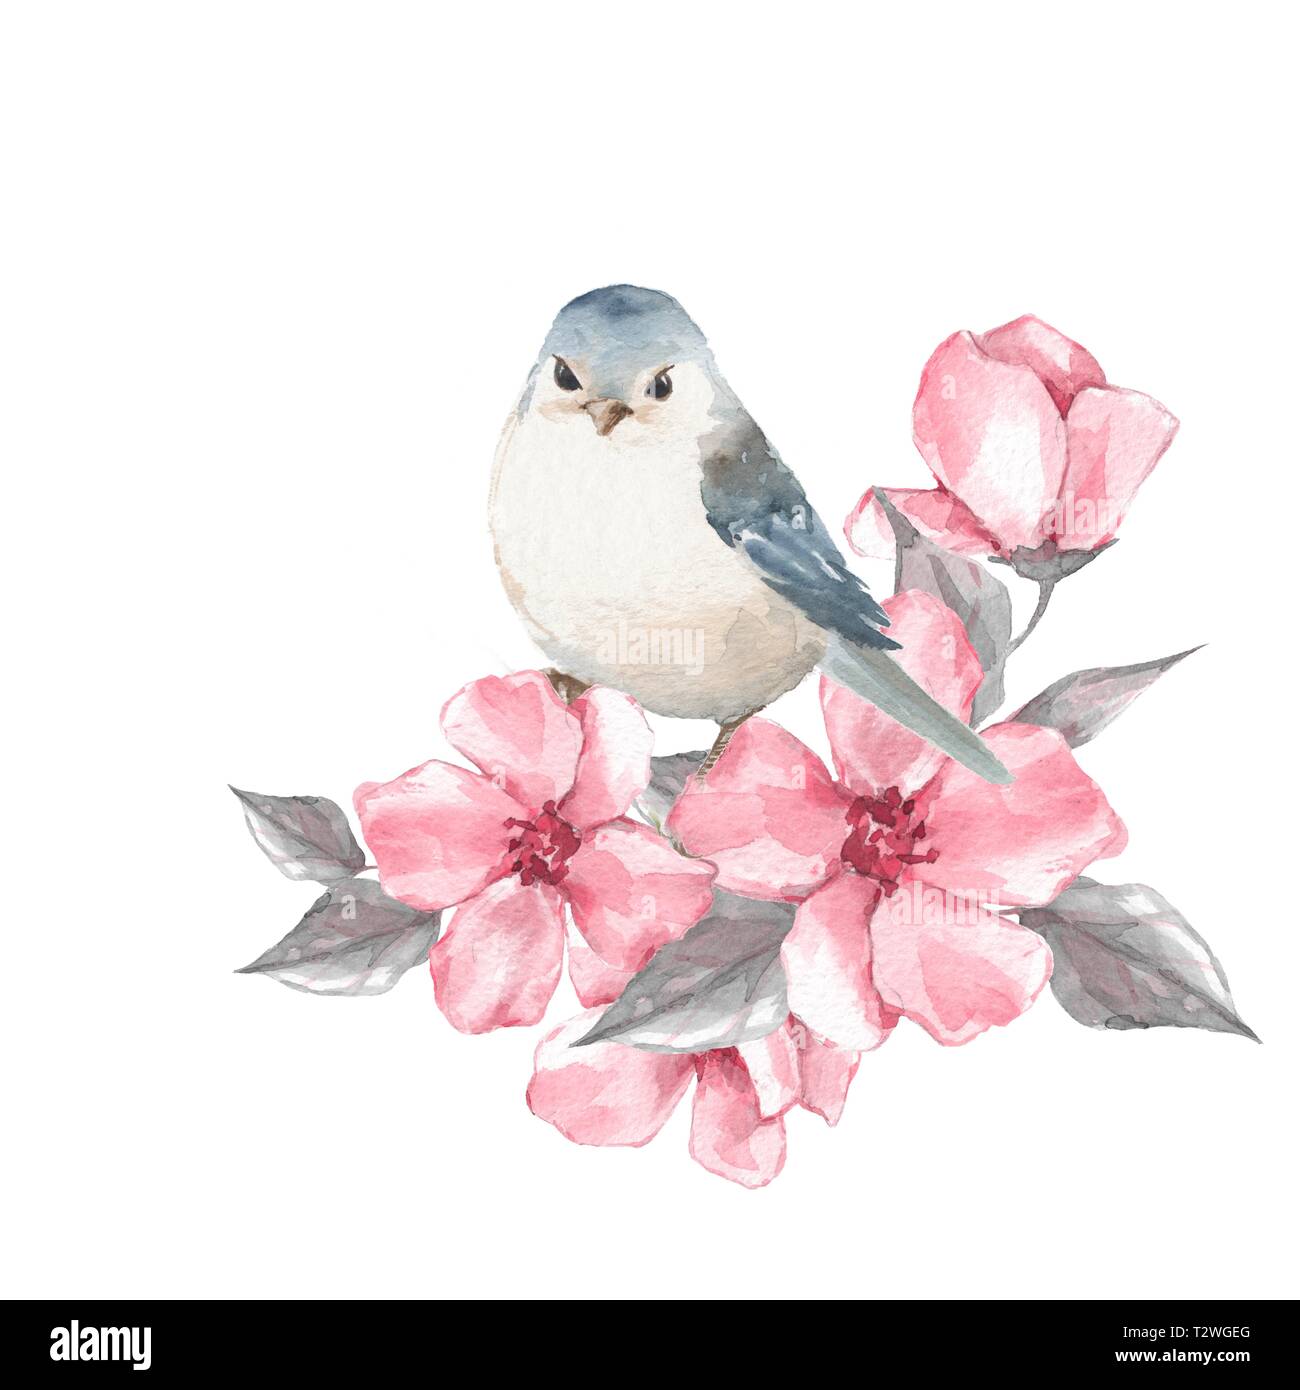 Cute bird and pink flowers. Watercolor painting Stock Photo